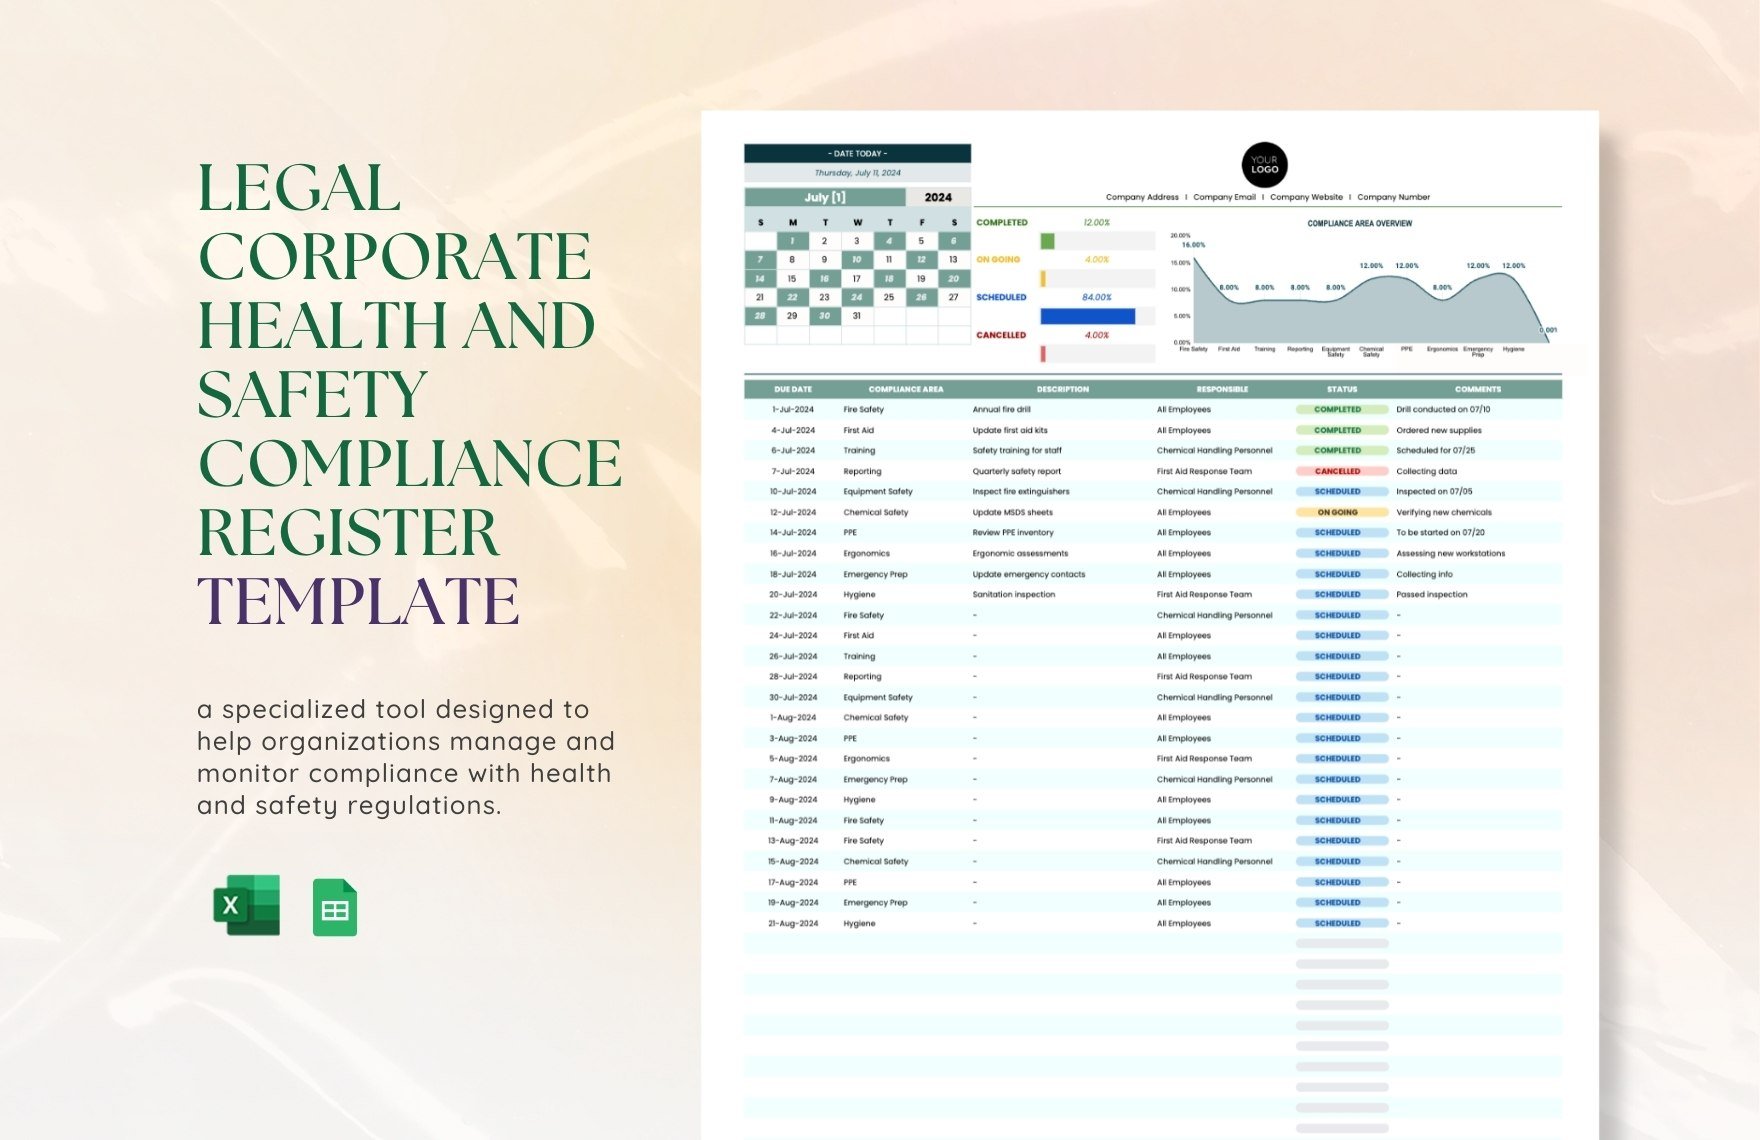 Legal Corporate Health and Safety Compliance Register Template in Excel, Google Sheets